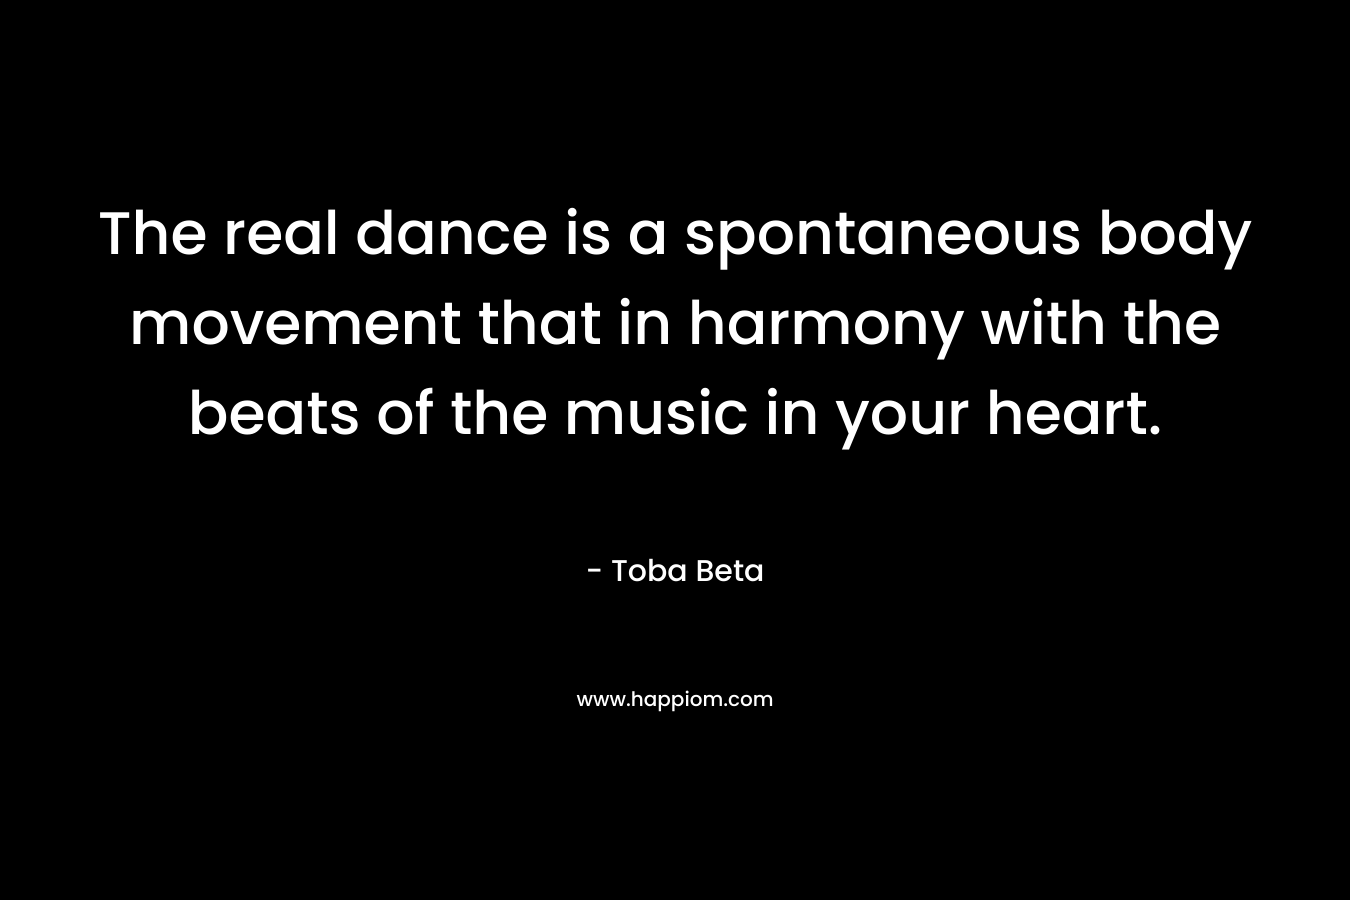 The real dance is a spontaneous body movement that in harmony with the beats of the music in your heart. – Toba Beta